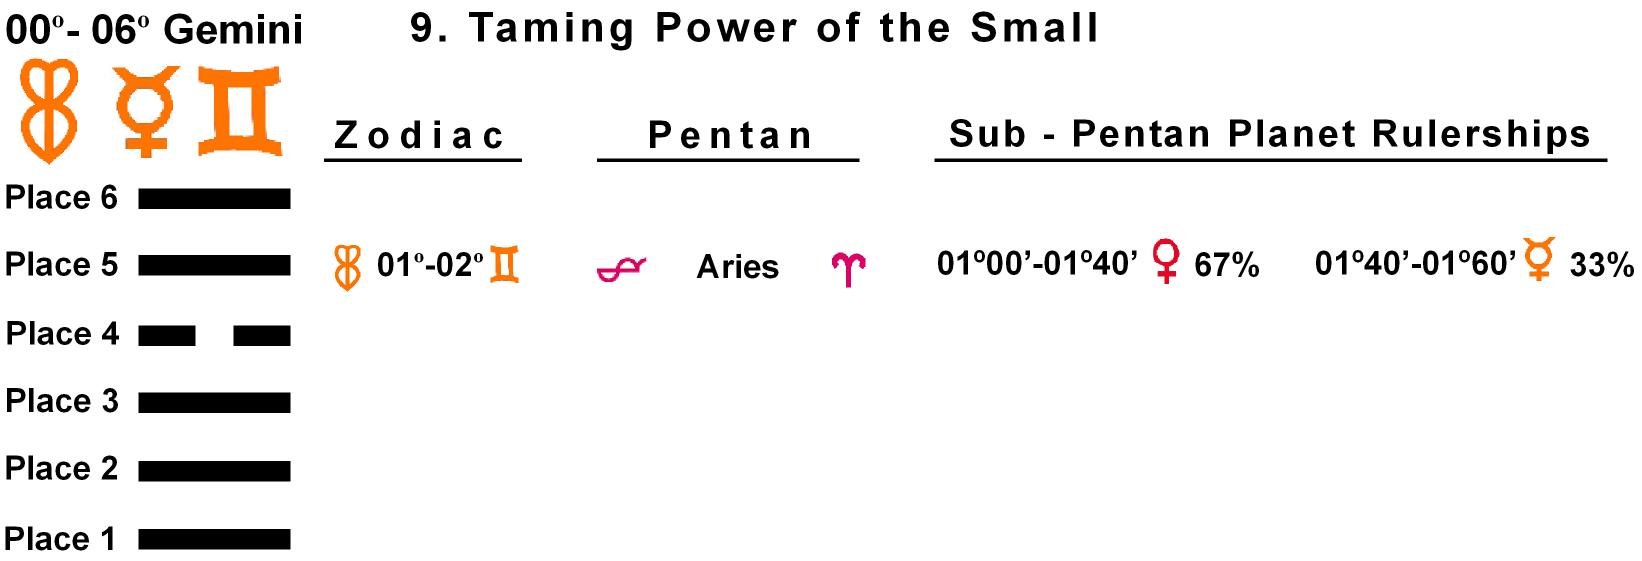 Pent-lines-03GE 01-02 Hx-09 Taming Power Of The Small